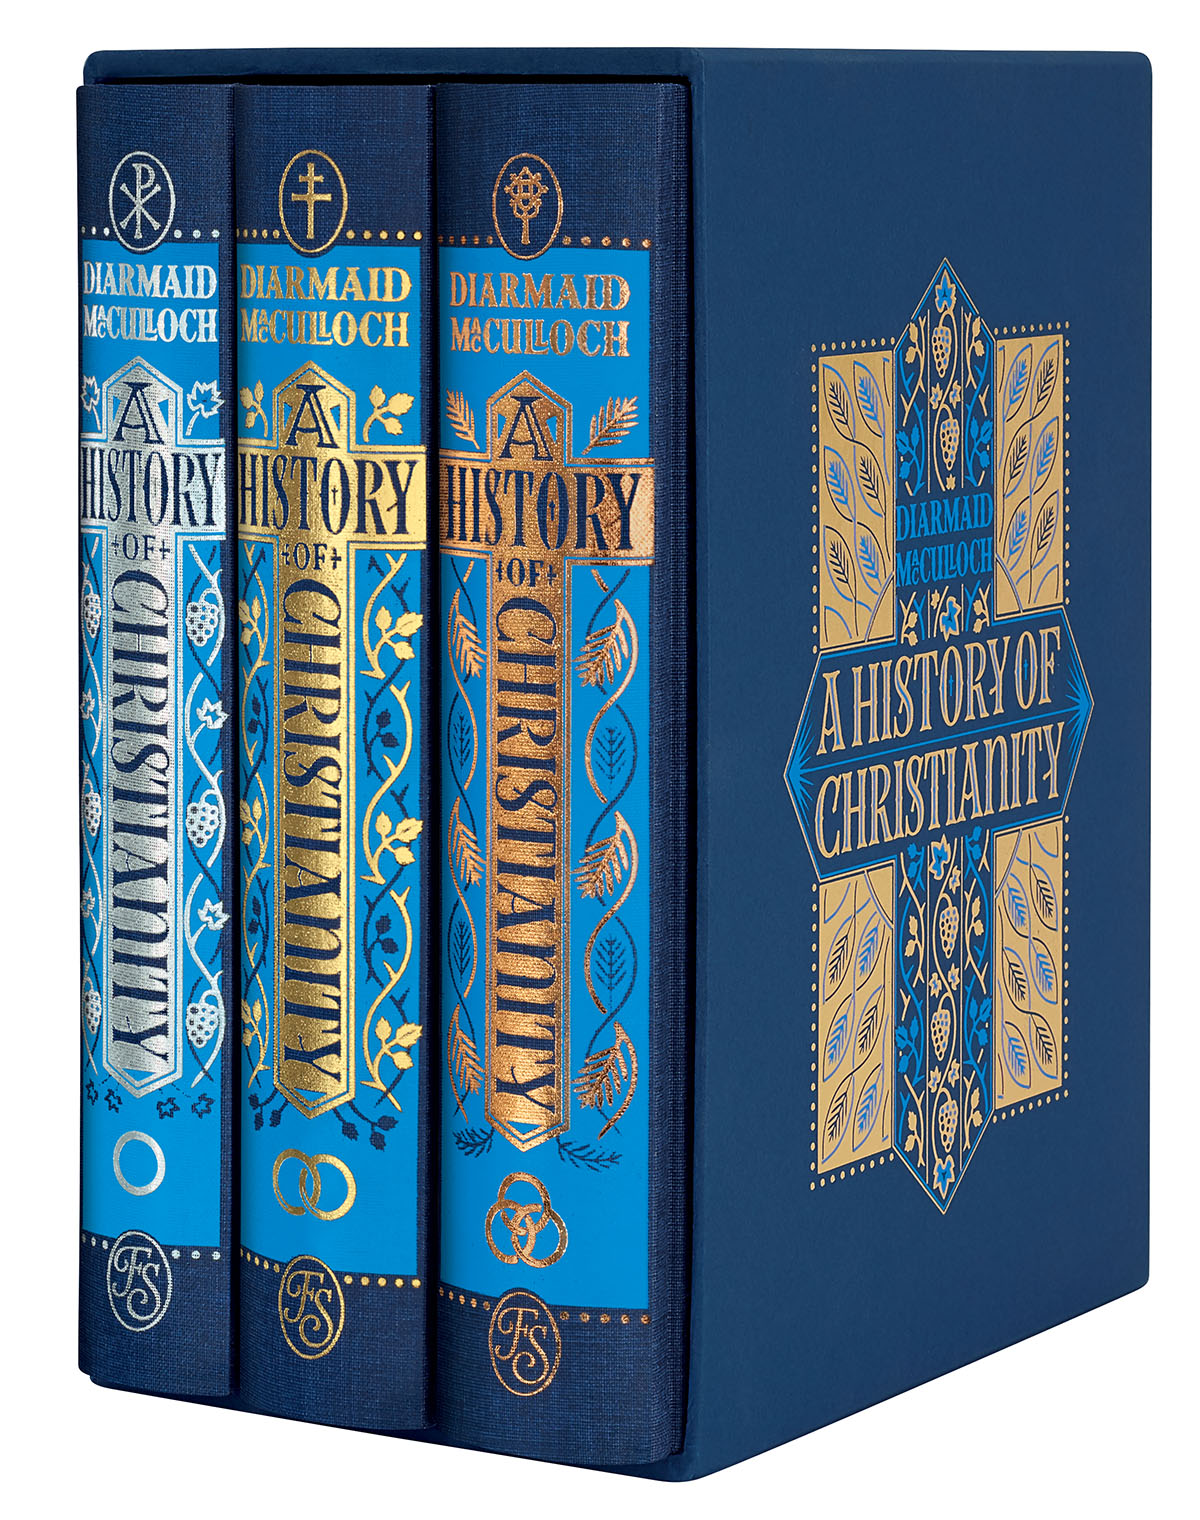 A History of Christianity, Slipcase and books | Jamie Clarke Type